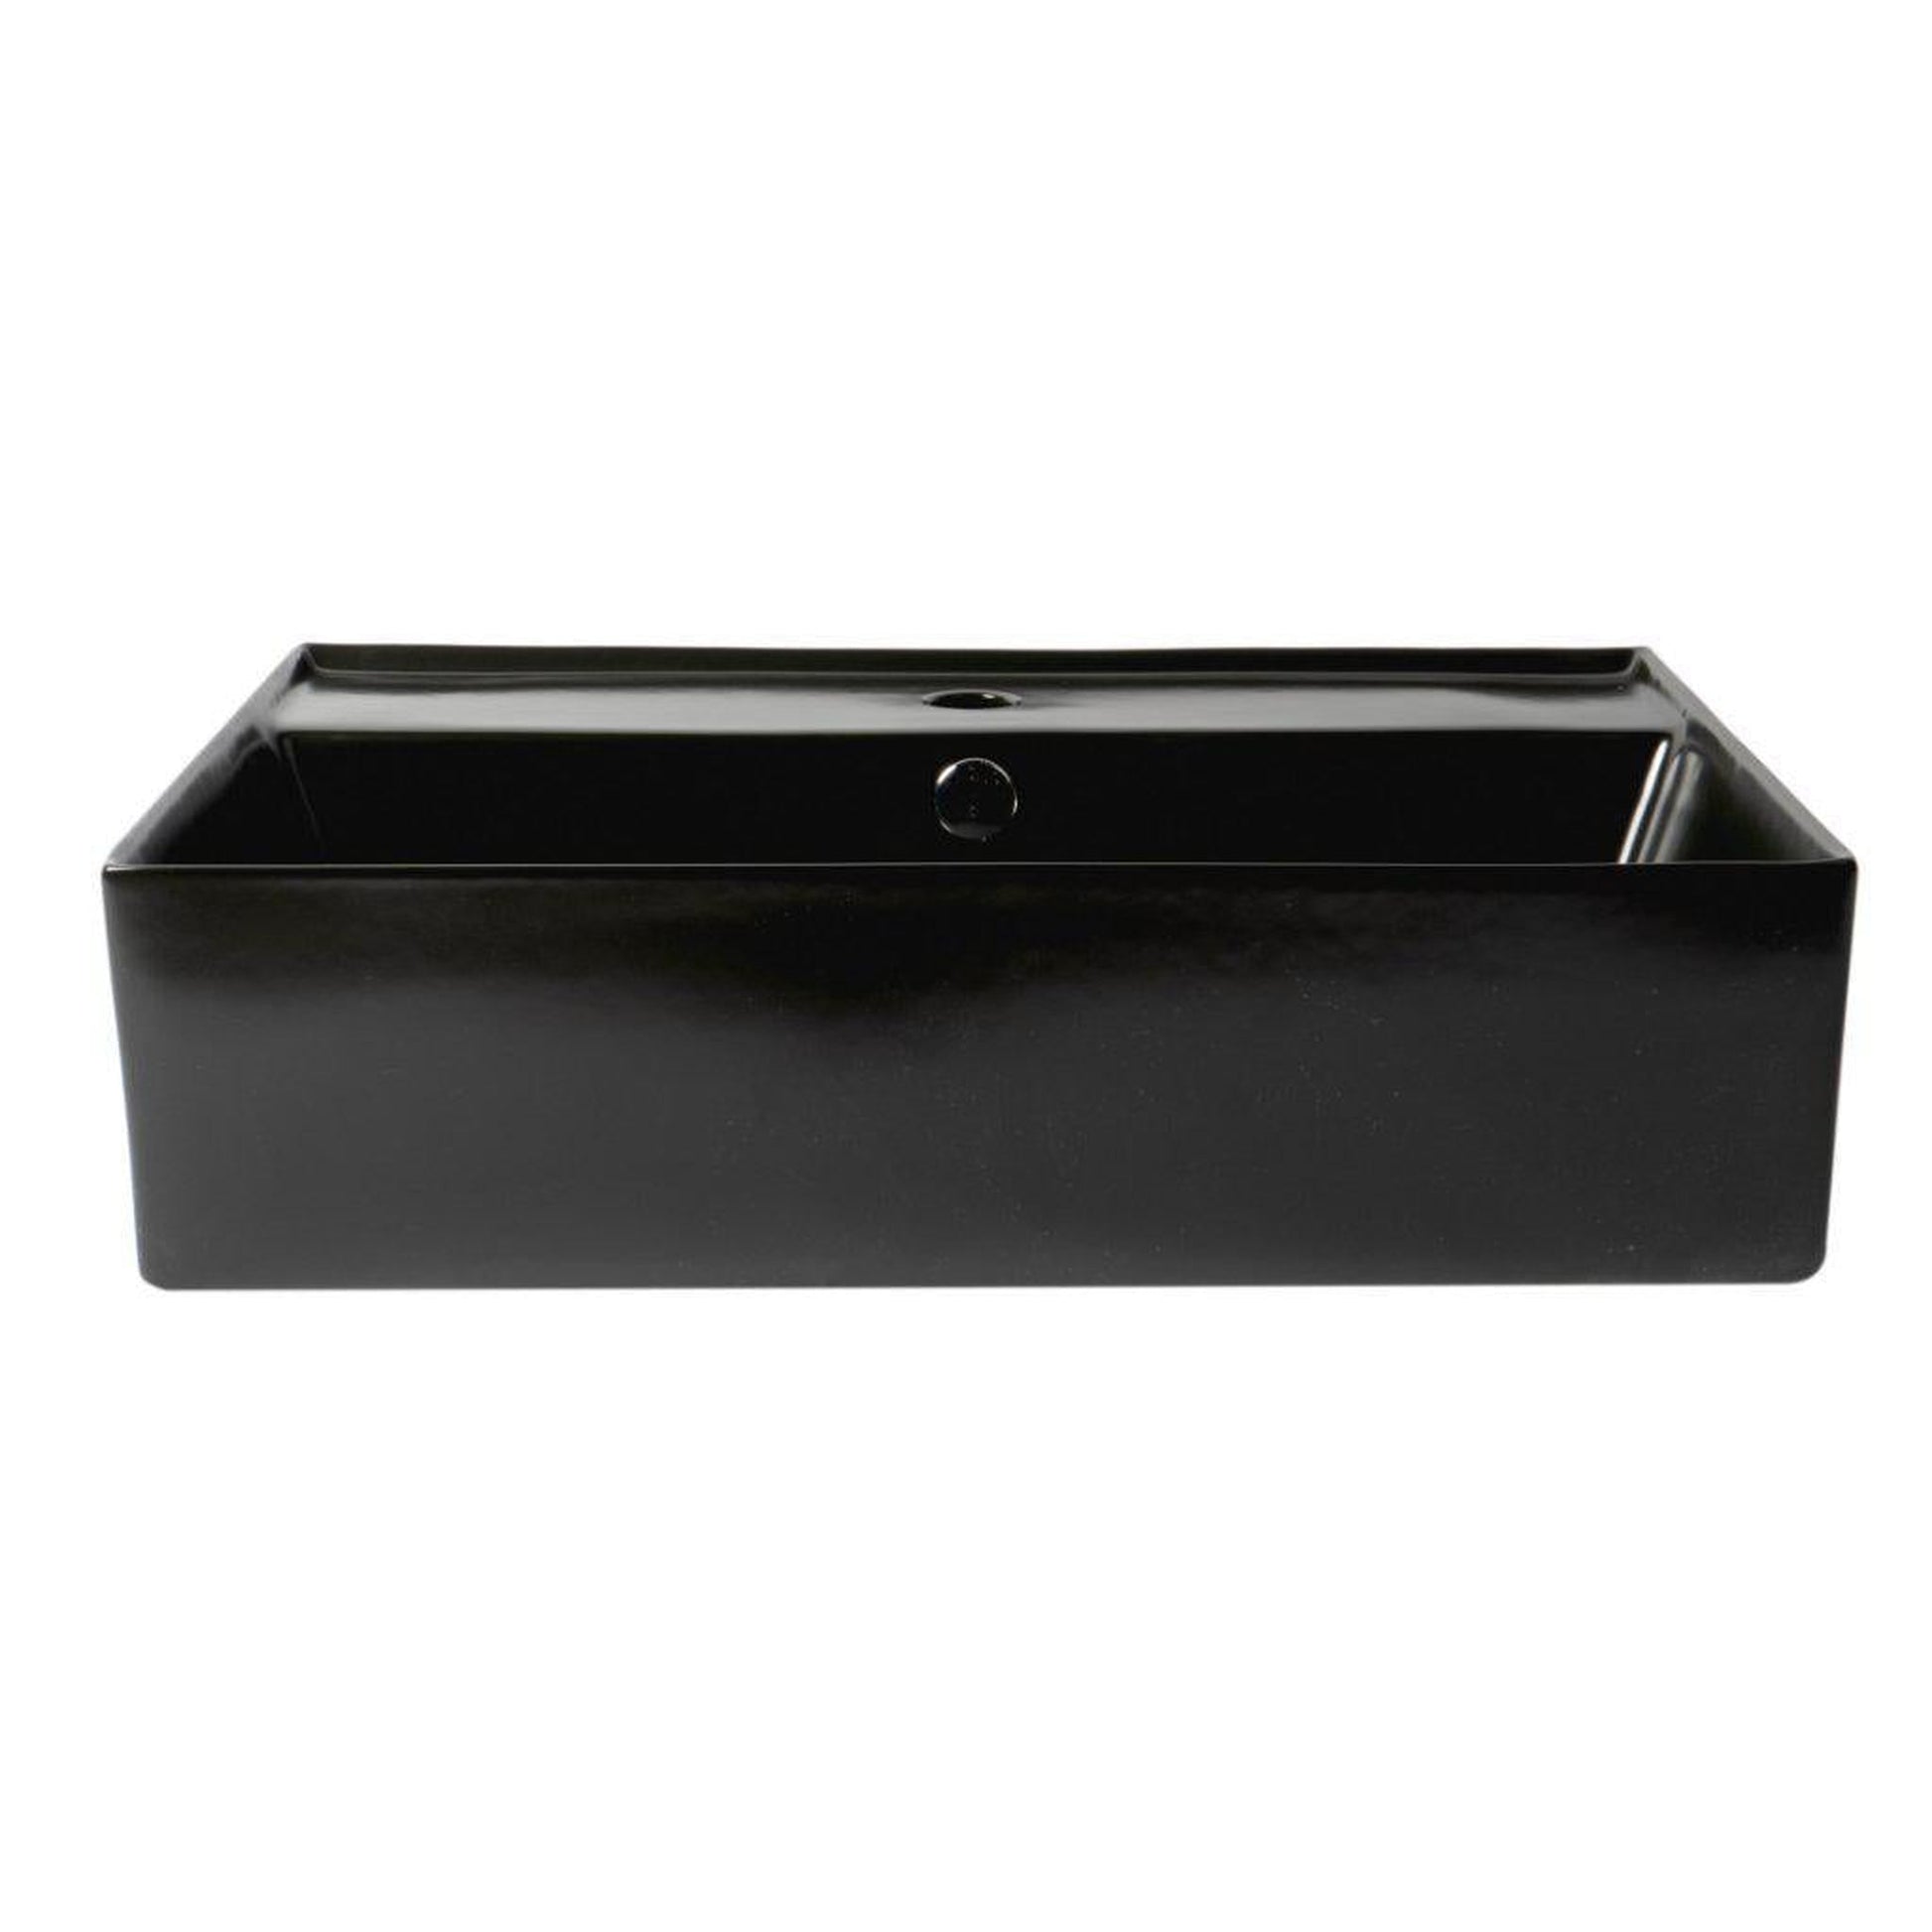 ALFI Brand ABC901-BM 24" Black Matte Above Mount Rectangle Ceramic Bathroom Sink With Single Faucet Hole and Overflow